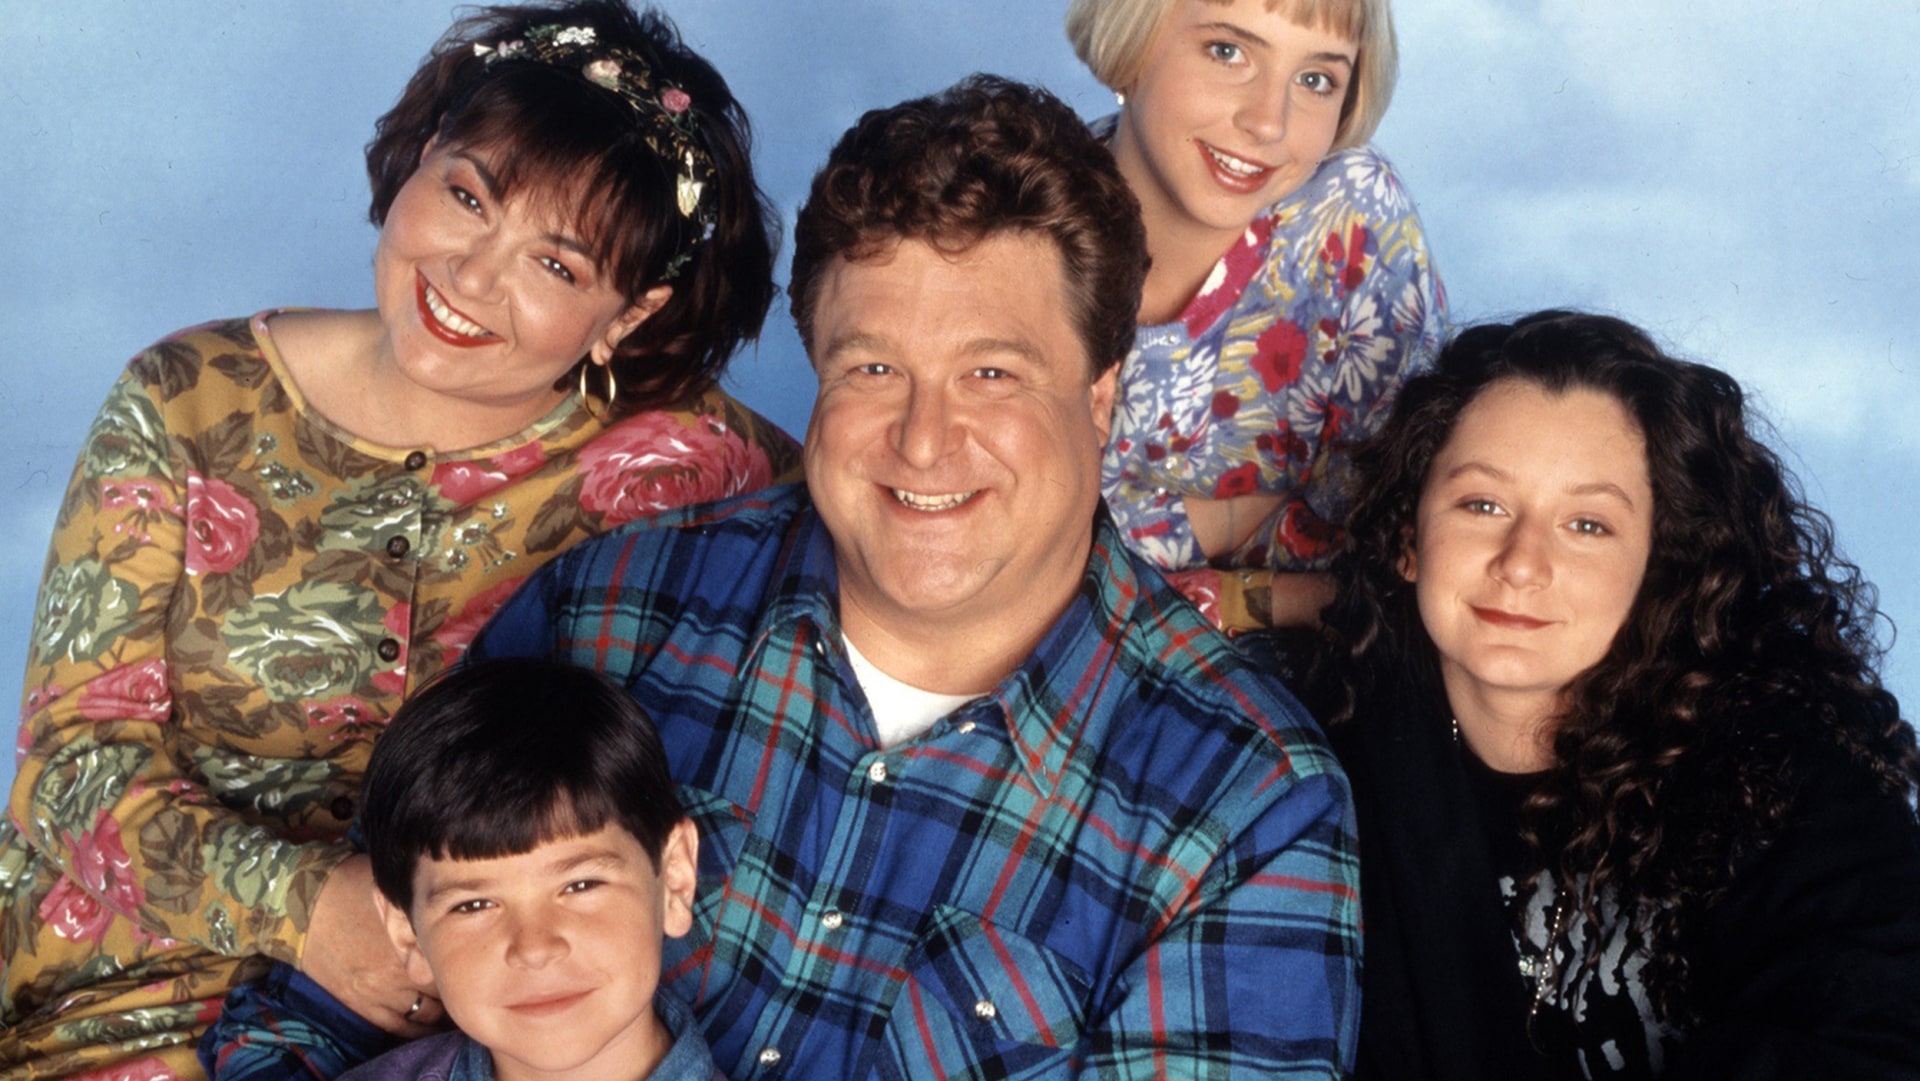 see-the-roseanne-cast-then-and-now-today